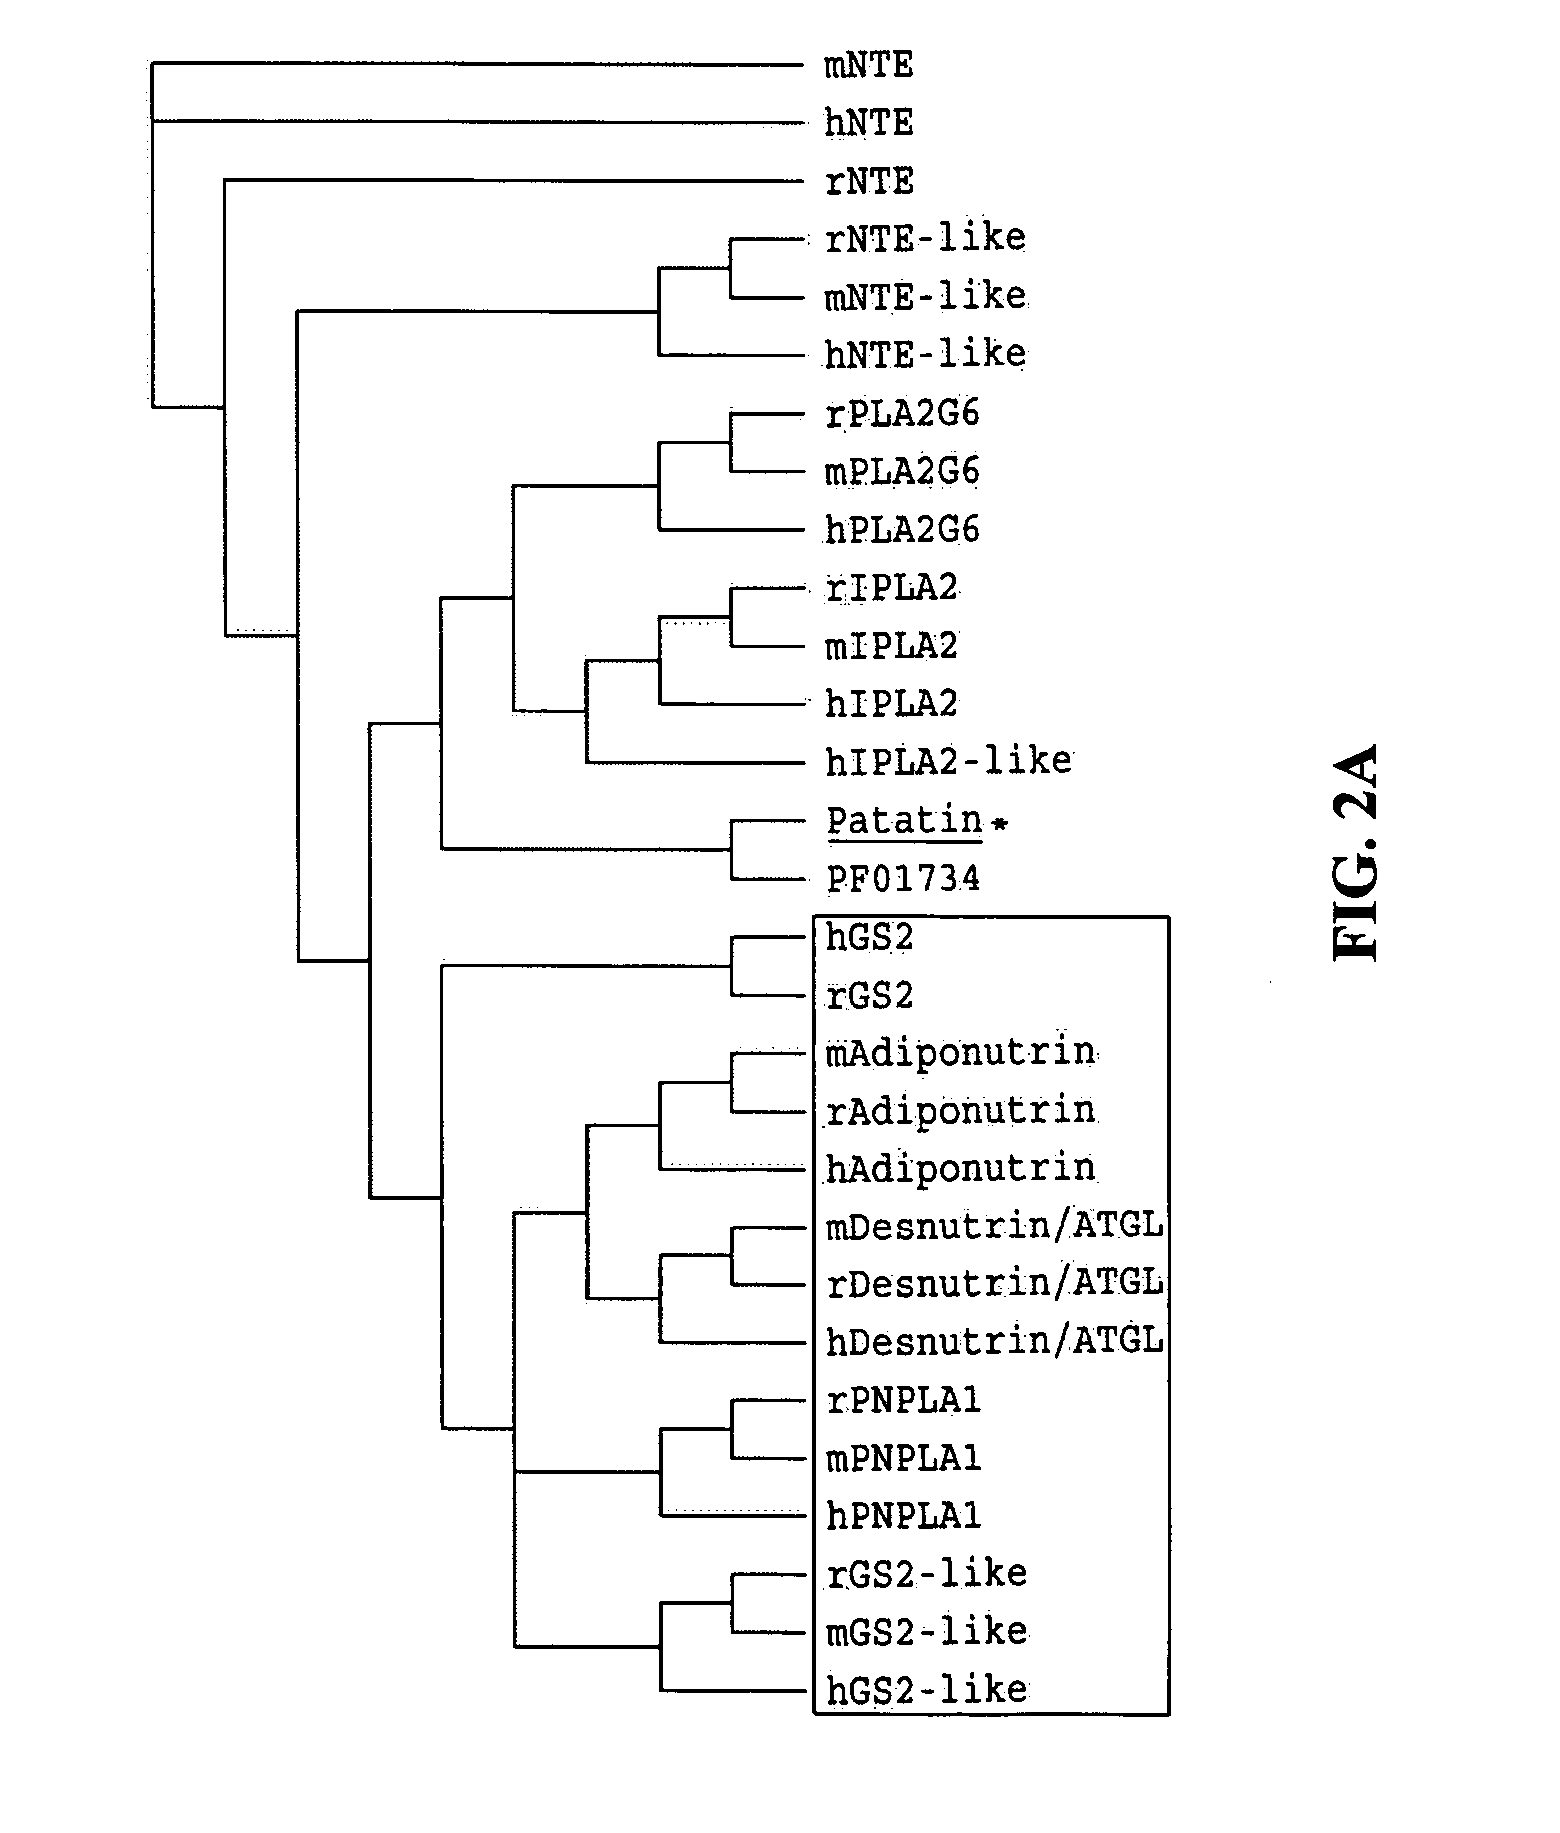 Identification of adiponutrin-related proteins as esterases and methods of use for the same